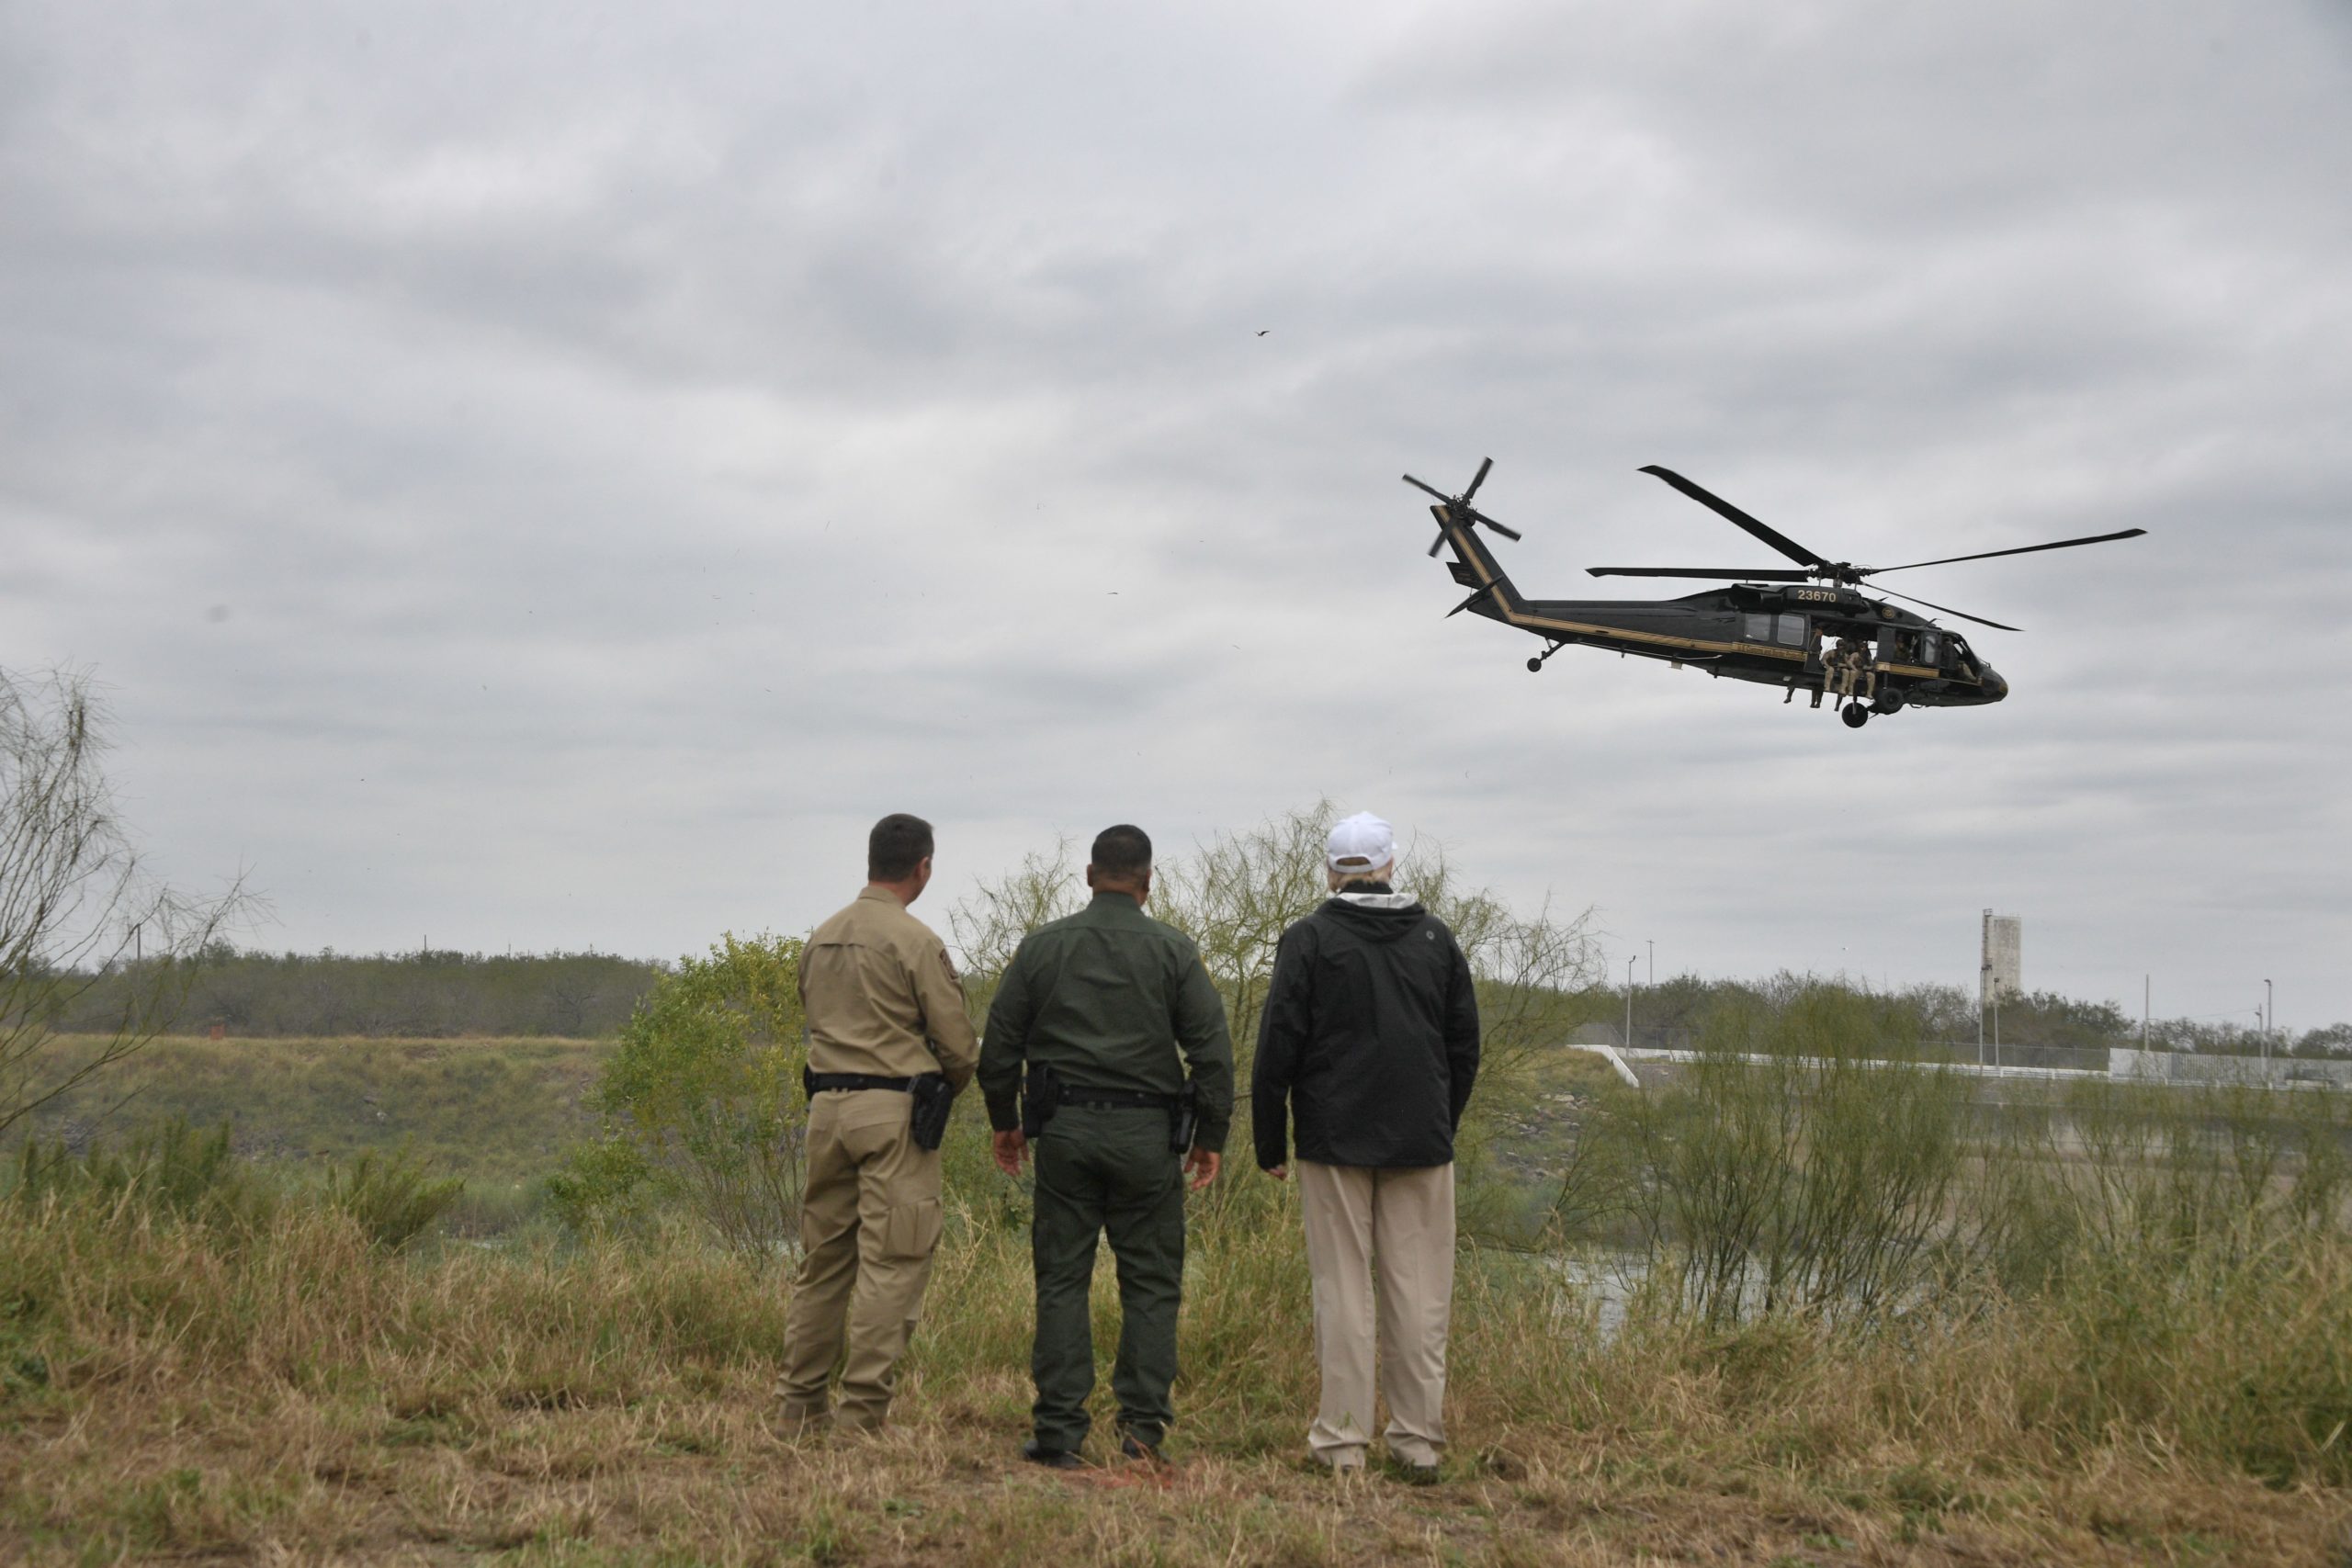 US President Donald Trump stands with Border Patrol agents at the Rio Grande as a US Customs and Border Protection (CBP) helicopter flew overhead, after his visit to US Border Patrol McAllen Station in McAllen, Texas, on January 10, 2019. - Trump traveled to the US-Mexico border as part of his all-out offensive to build a wall, a day after he stormed out of negotiations when Democratic opponents refused to agree to fund the project in exchange for an end to a painful government shutdown. (Photo by Jim WATSON / AFP) (Photo credit should read JIM WATSON/AFP via Getty Images)